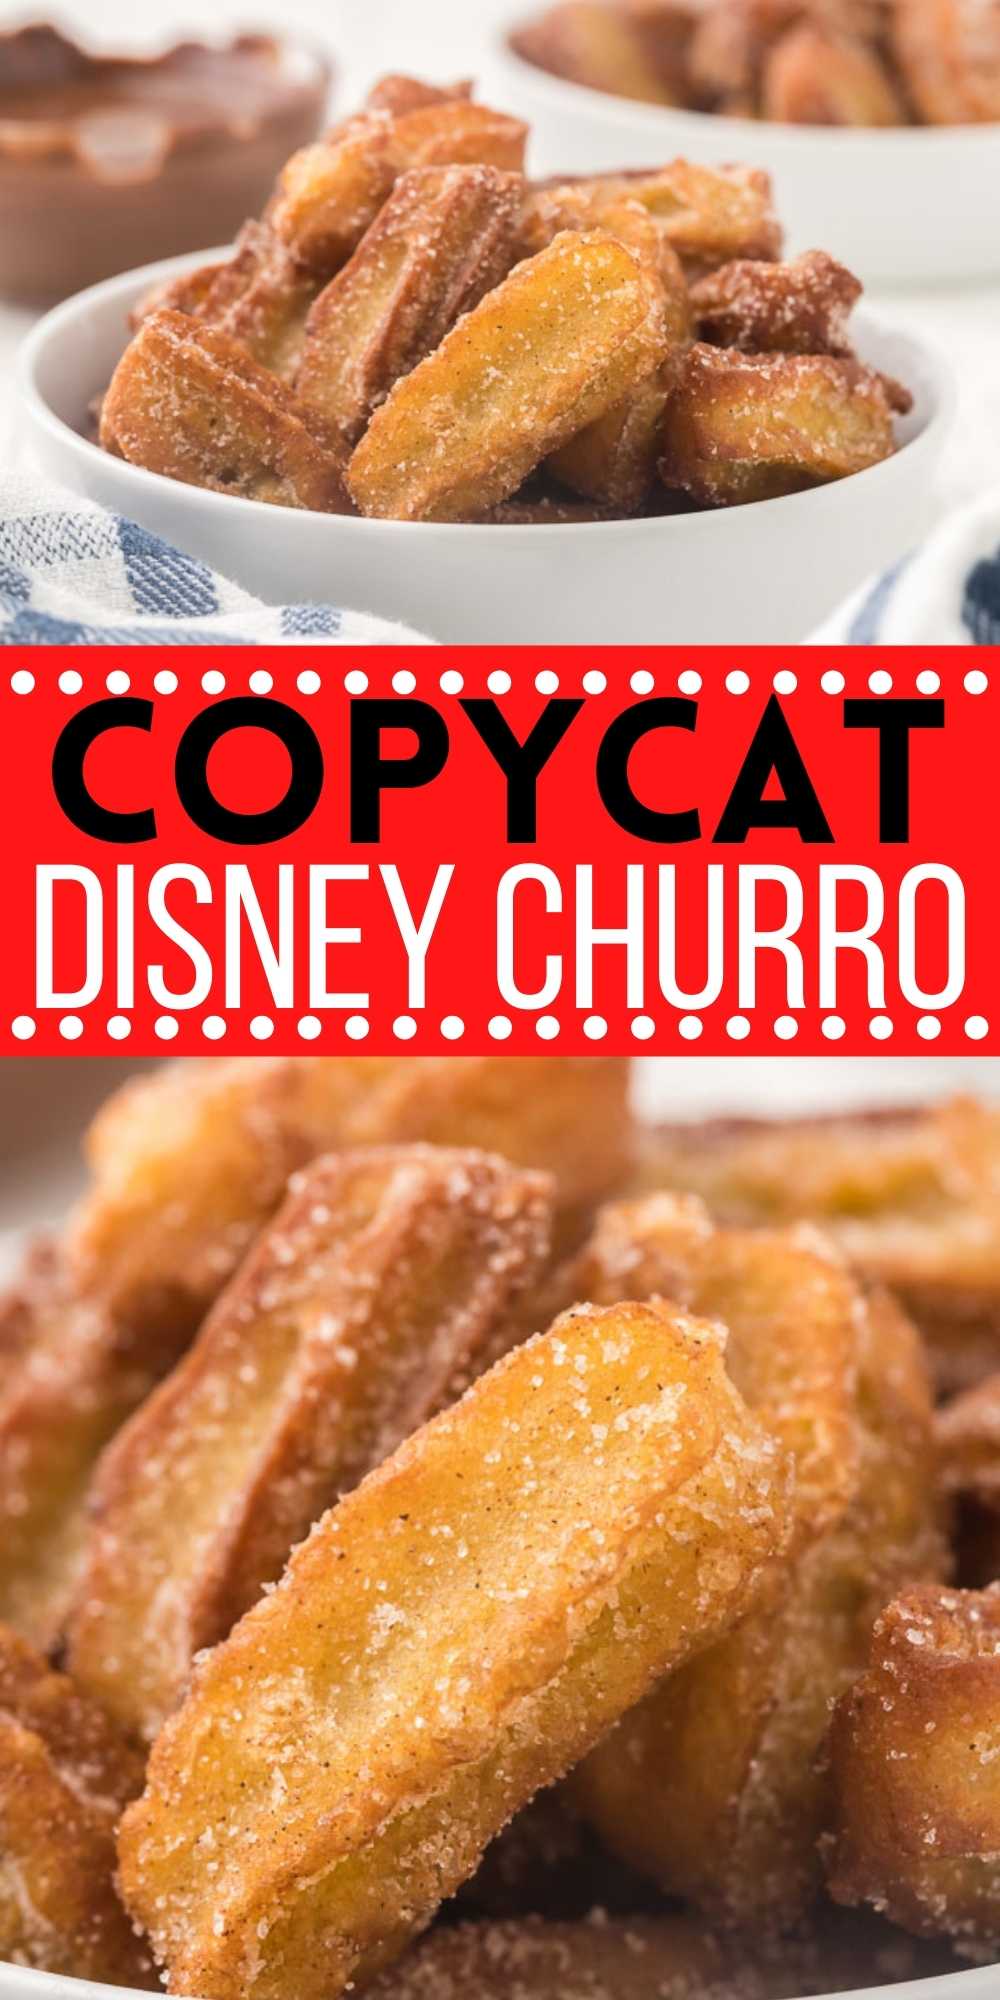 These homemade Disney churros tastes just like the one from Disney World. They are simple to prepare and so delicious! Everyone loves these copycat Disney Churro bites.  They are easy to make and tastes amazing too.  #eatingonsadime #copycatrecipes #disneyrecipes #churros 
